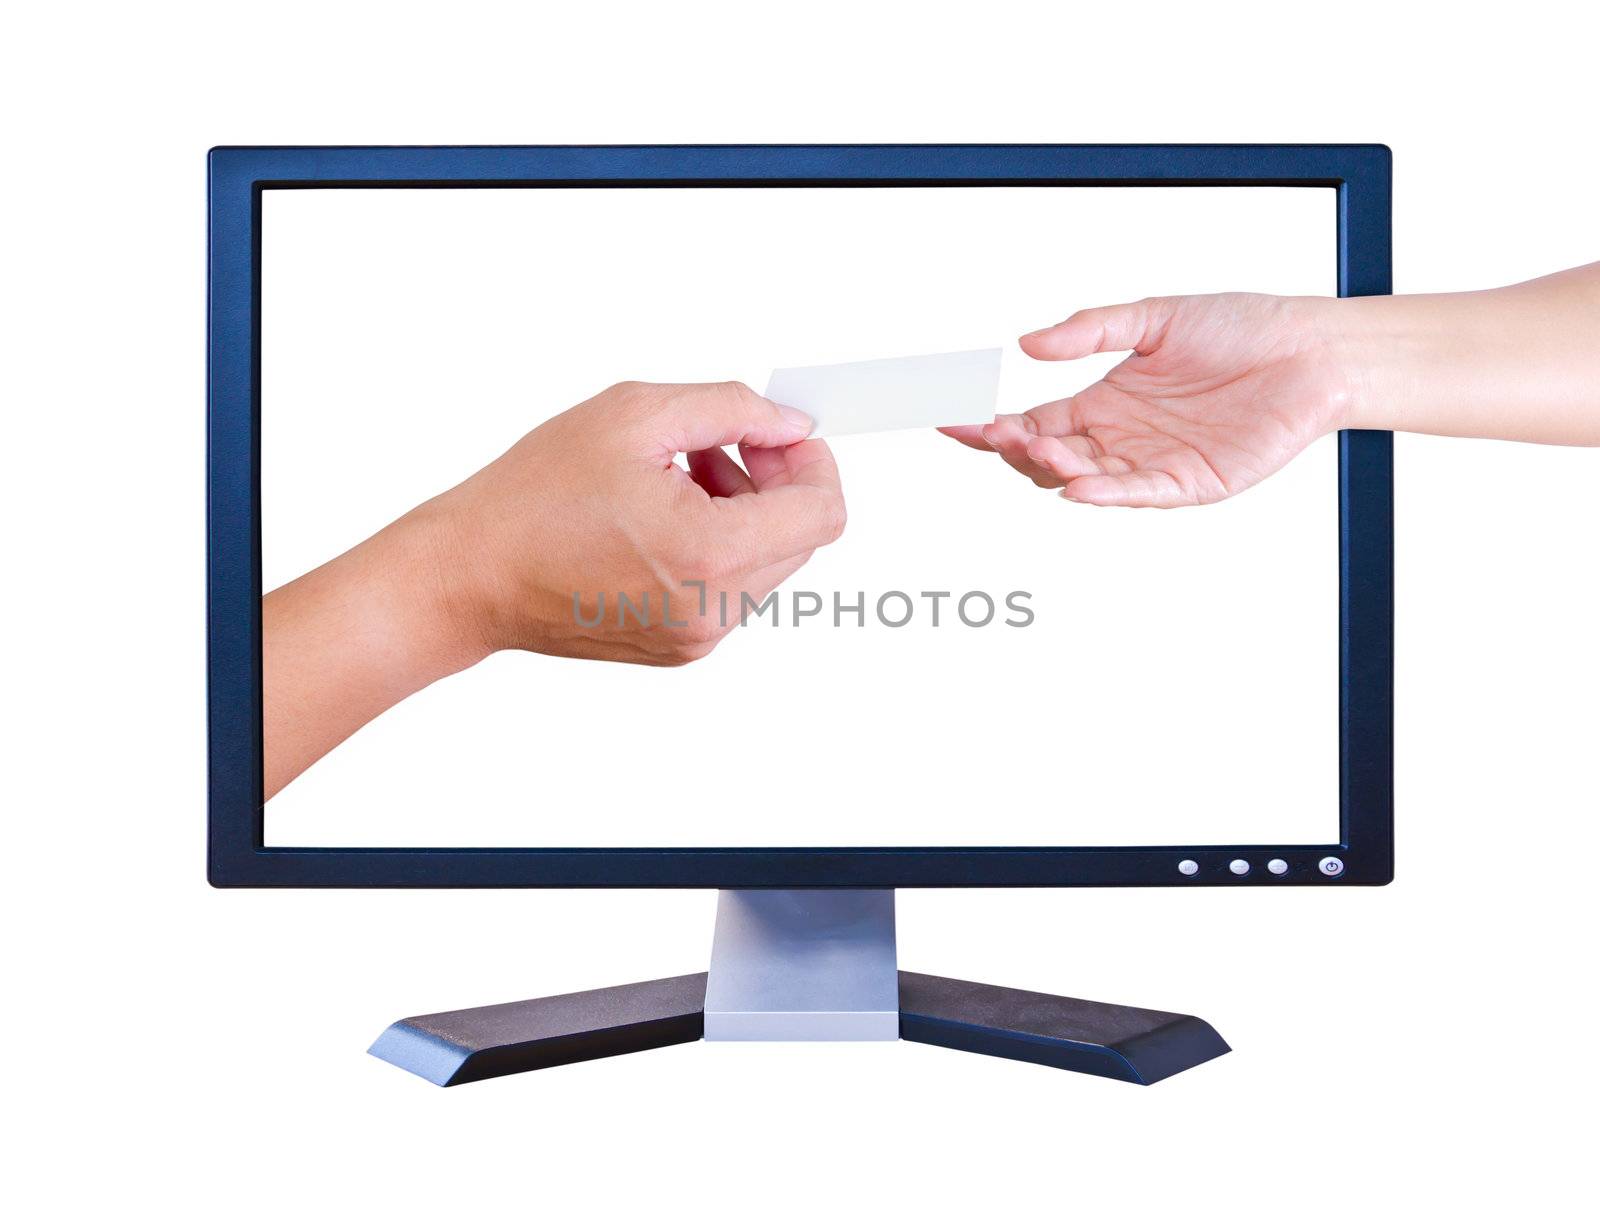 hand inside monitor give name card to hand outside monitor by tungphoto